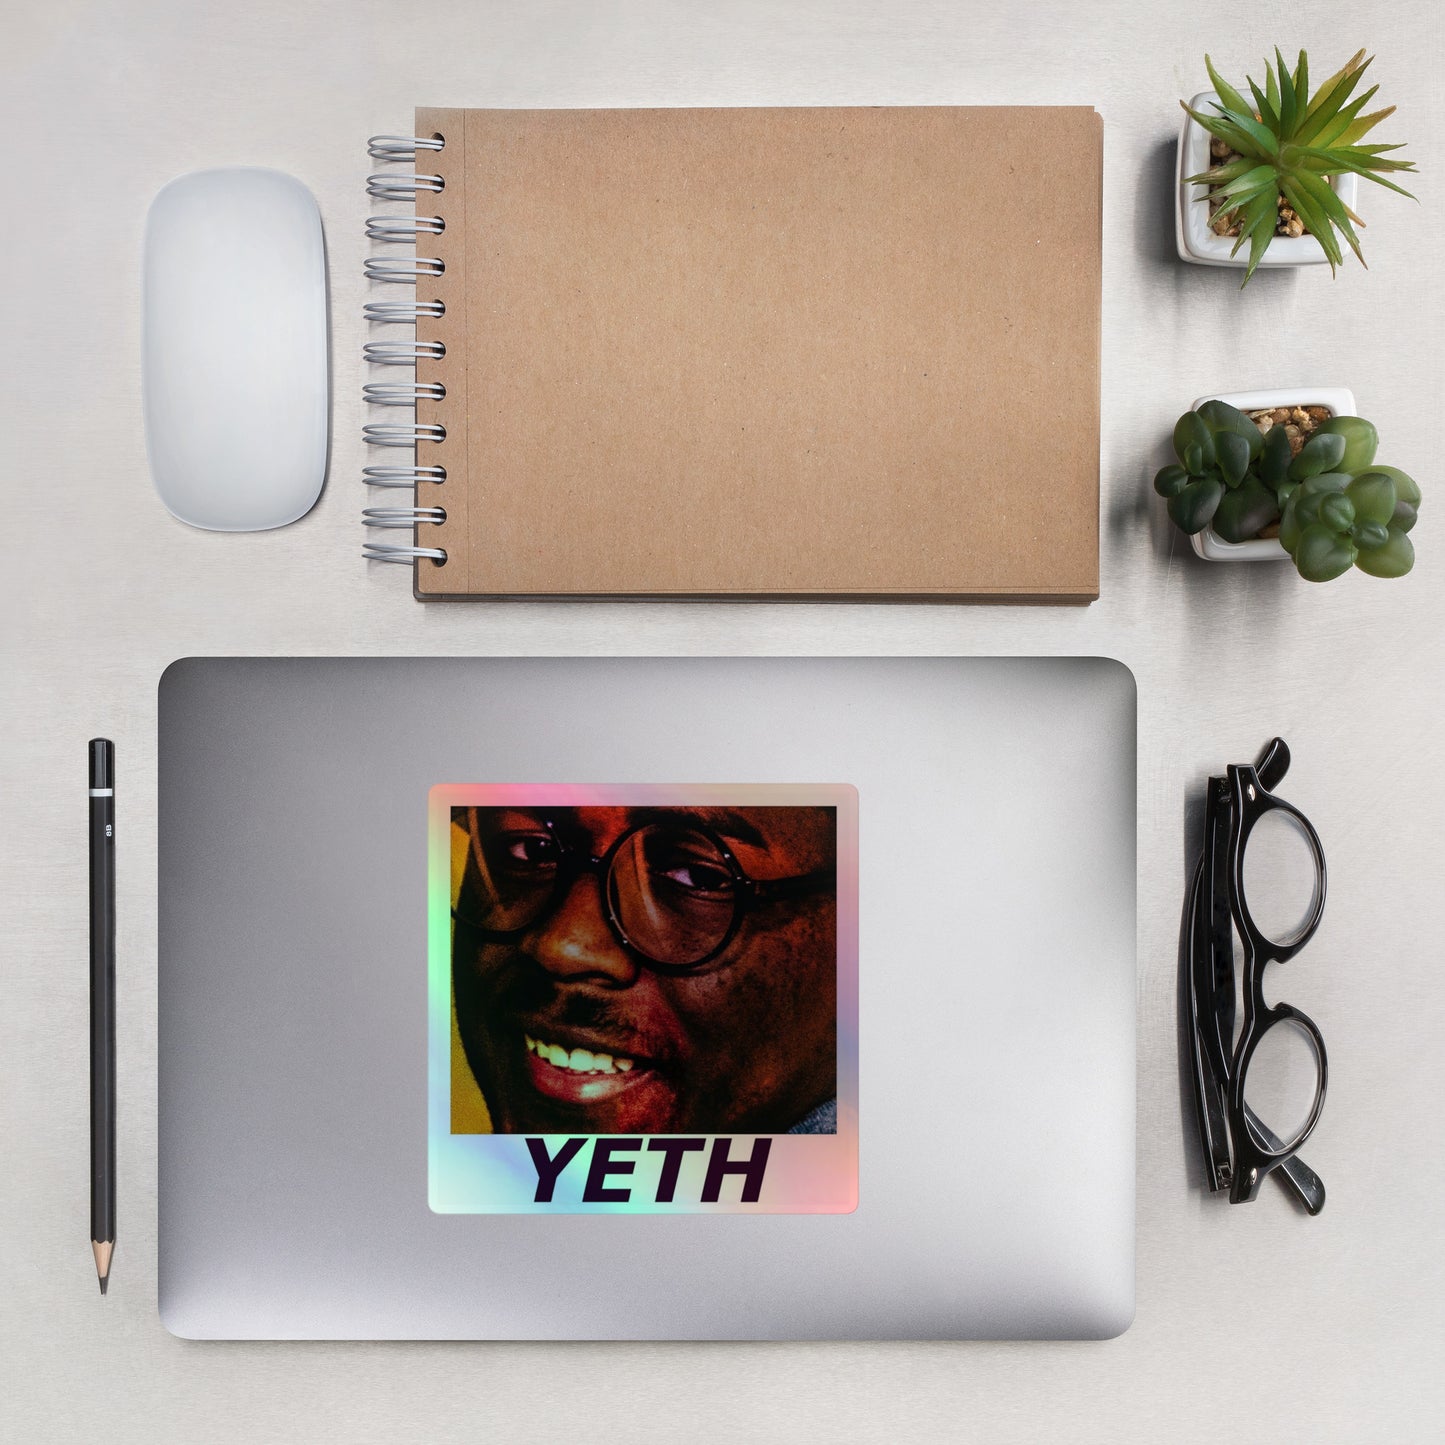 YETH Holographic Sticker